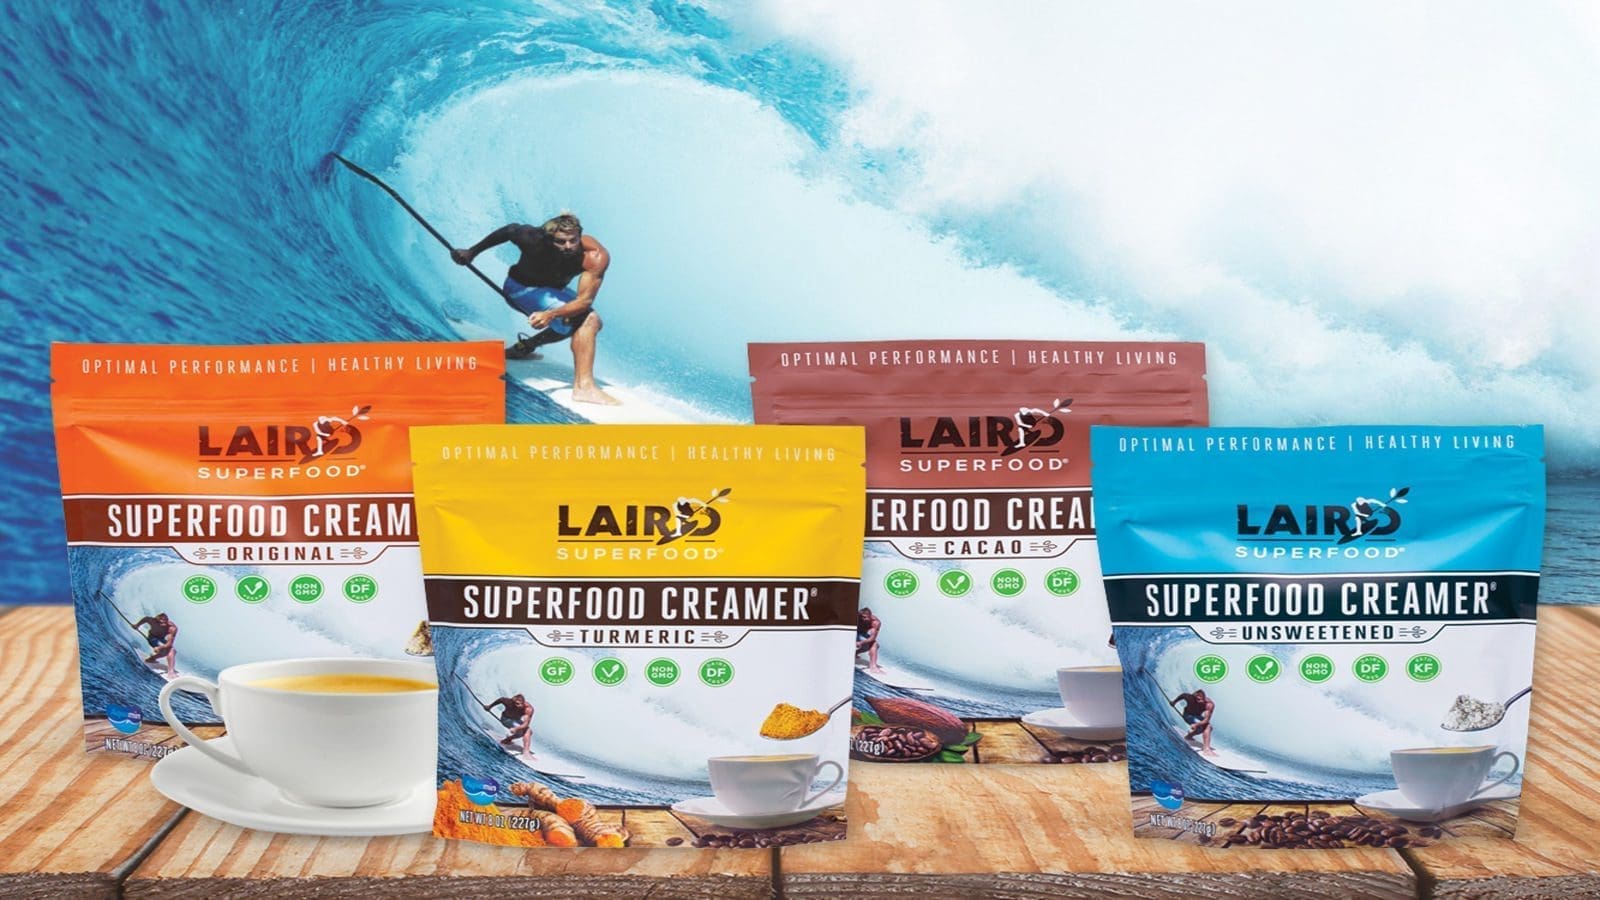 Laird superfood acquires SQF Level 2 Certification